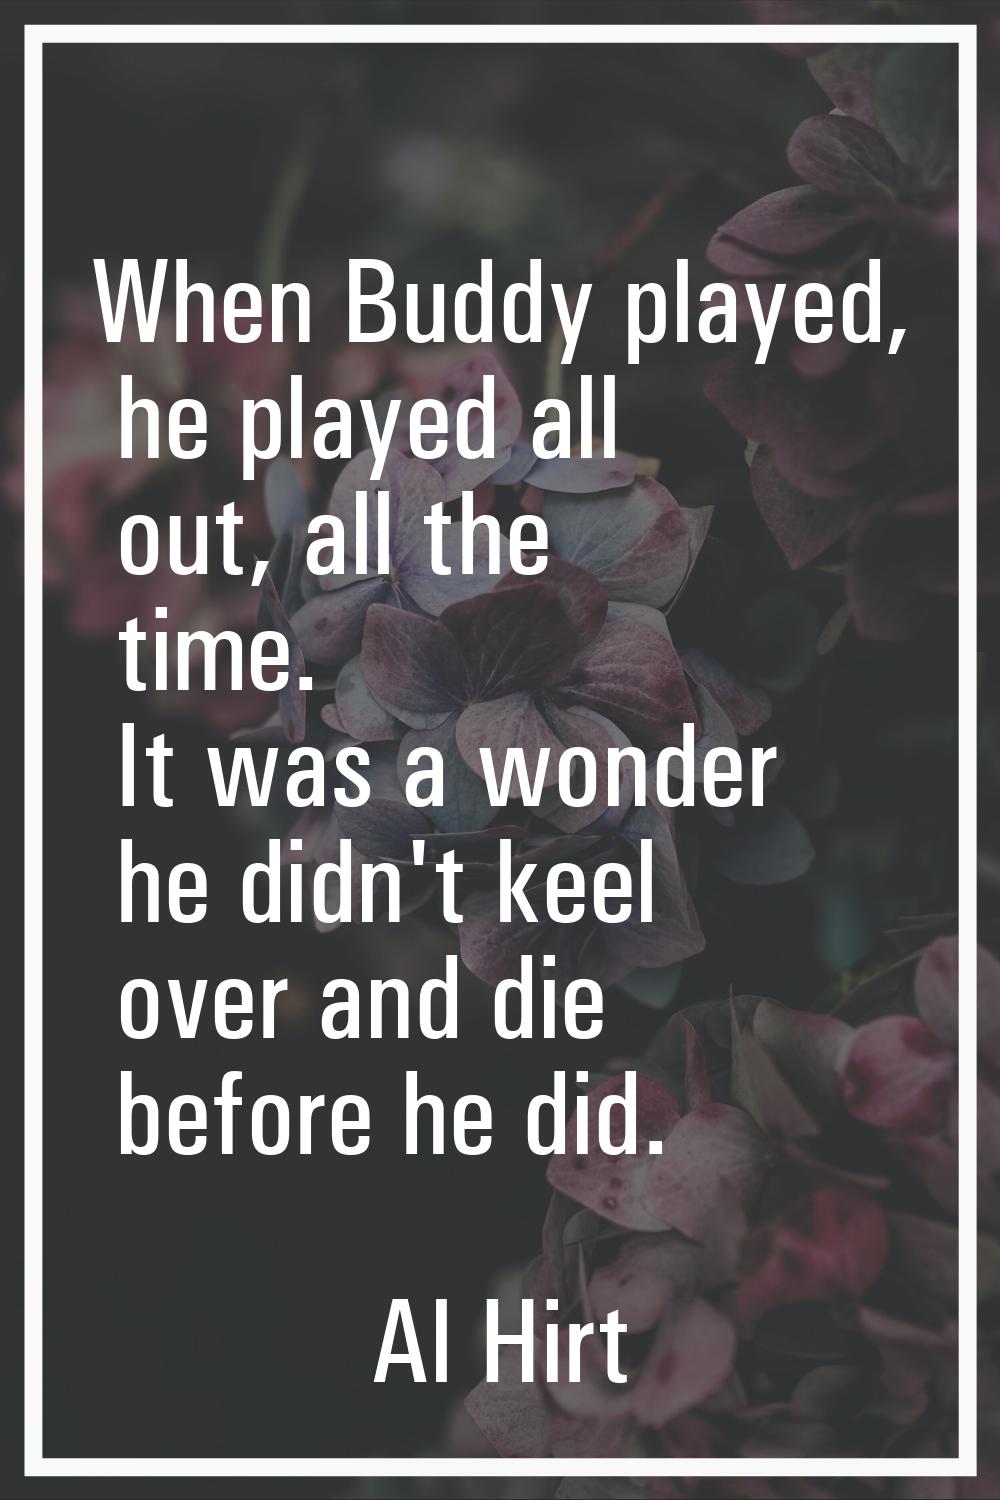 When Buddy played, he played all out, all the time. It was a wonder he didn't keel over and die bef